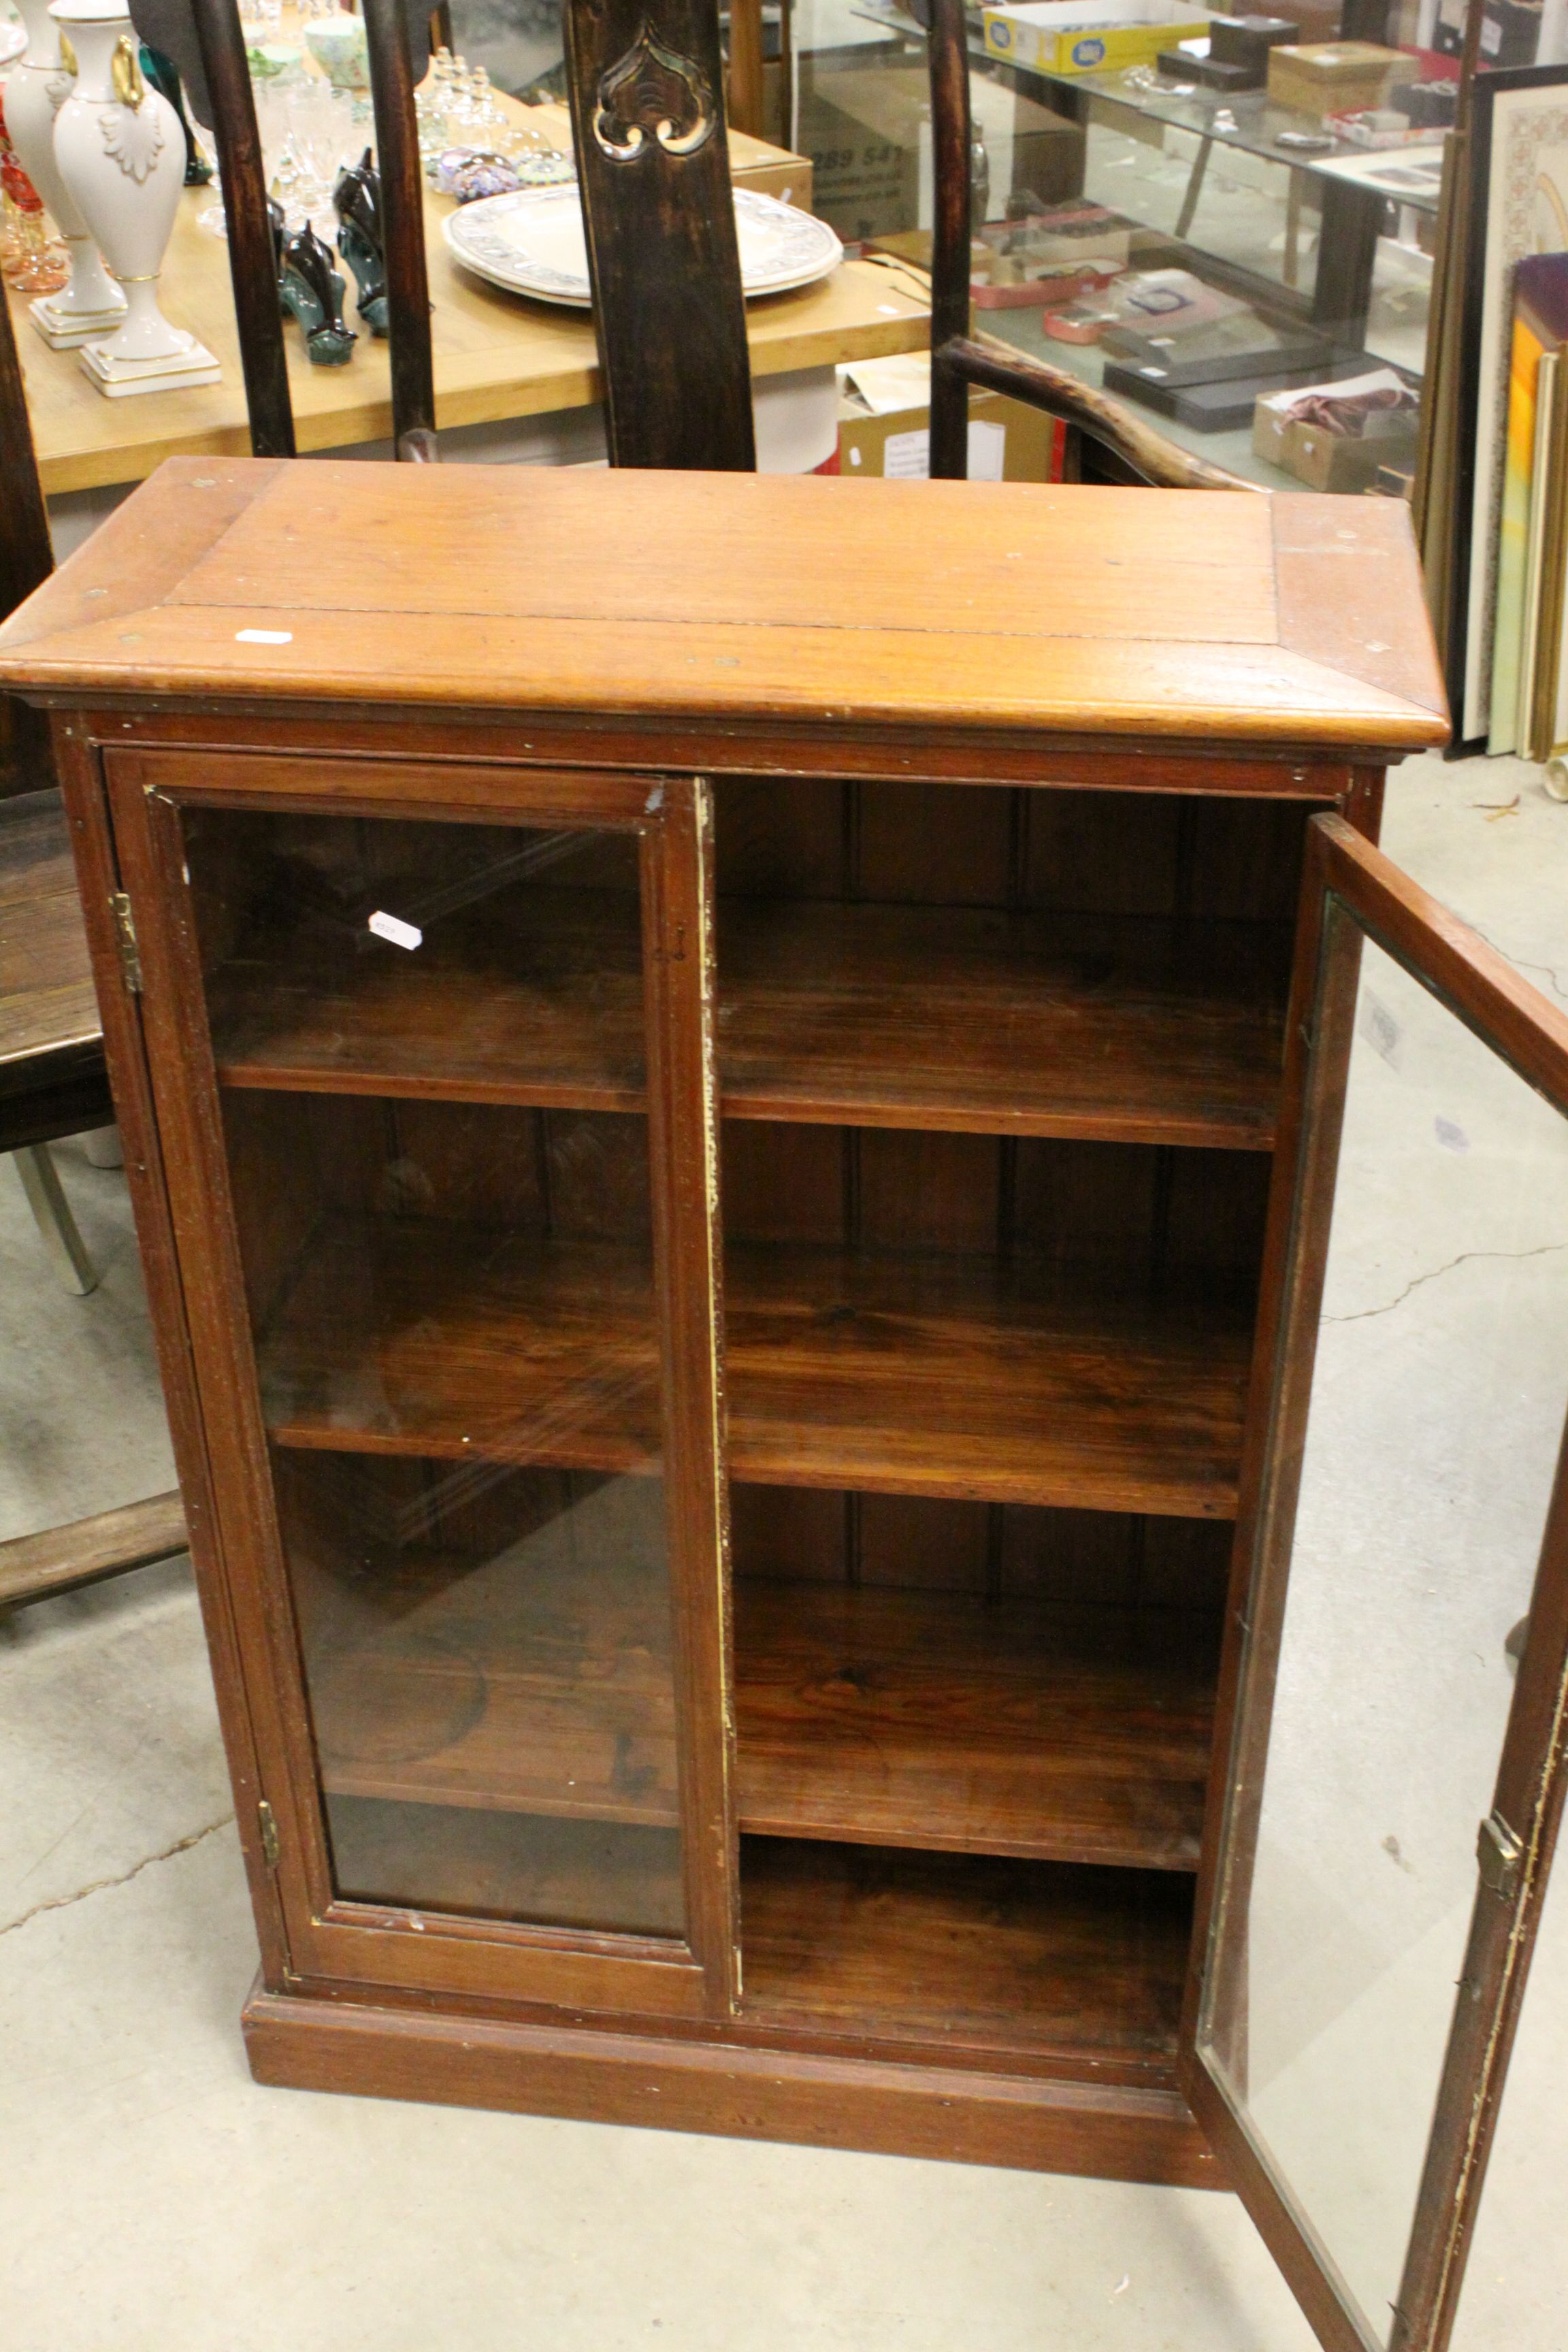 Small 19th century Mahogany Glazed Bookcase, 66cms wide x 99cms high - Image 5 of 5